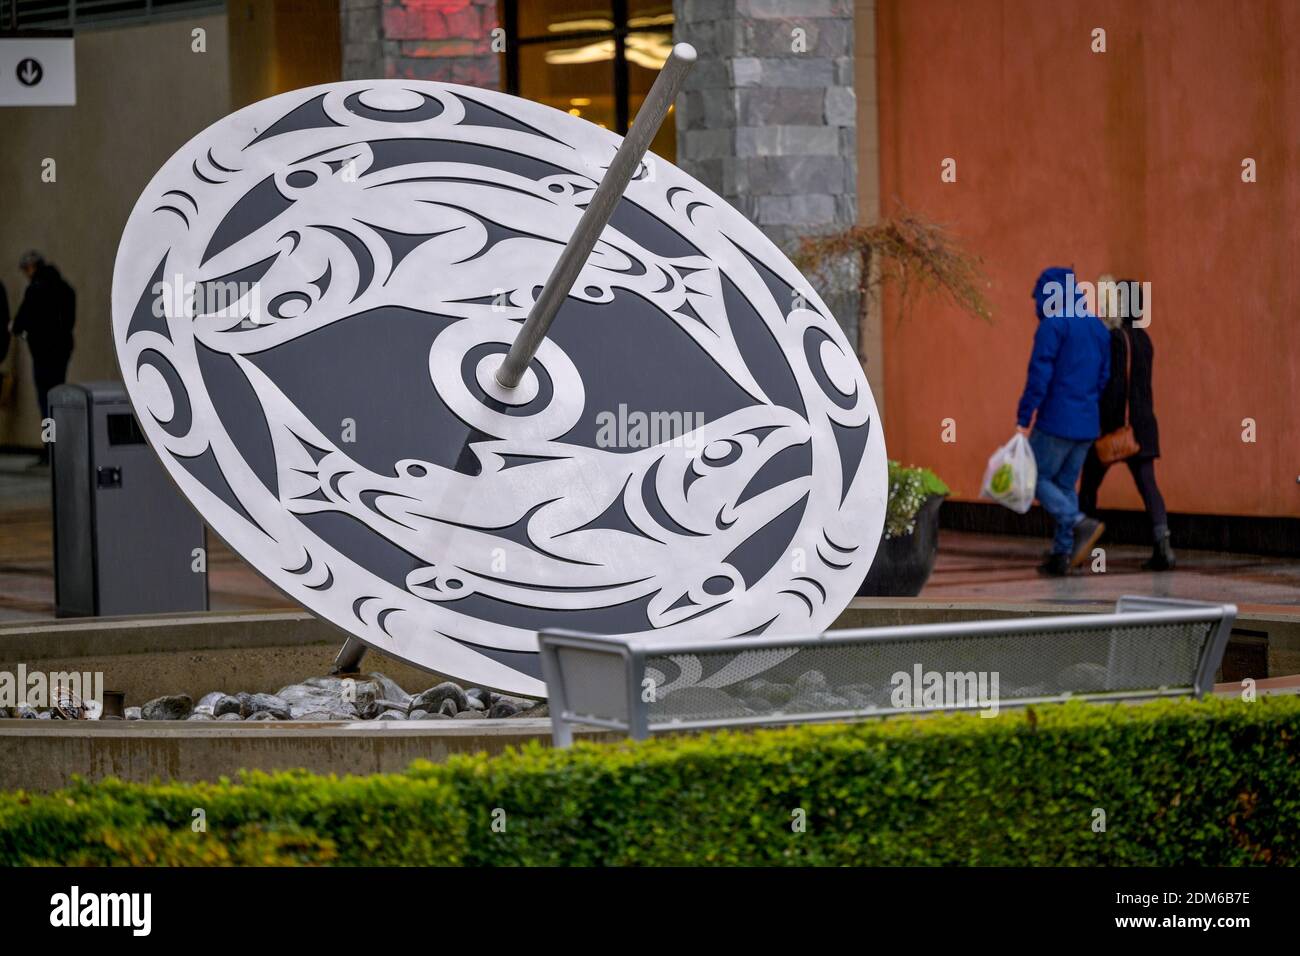 Spindle whorl, by artist Jody Broomfield, Park Royal Shopping Centre, West Vancouver, British Columbia, Canada Stock Photo